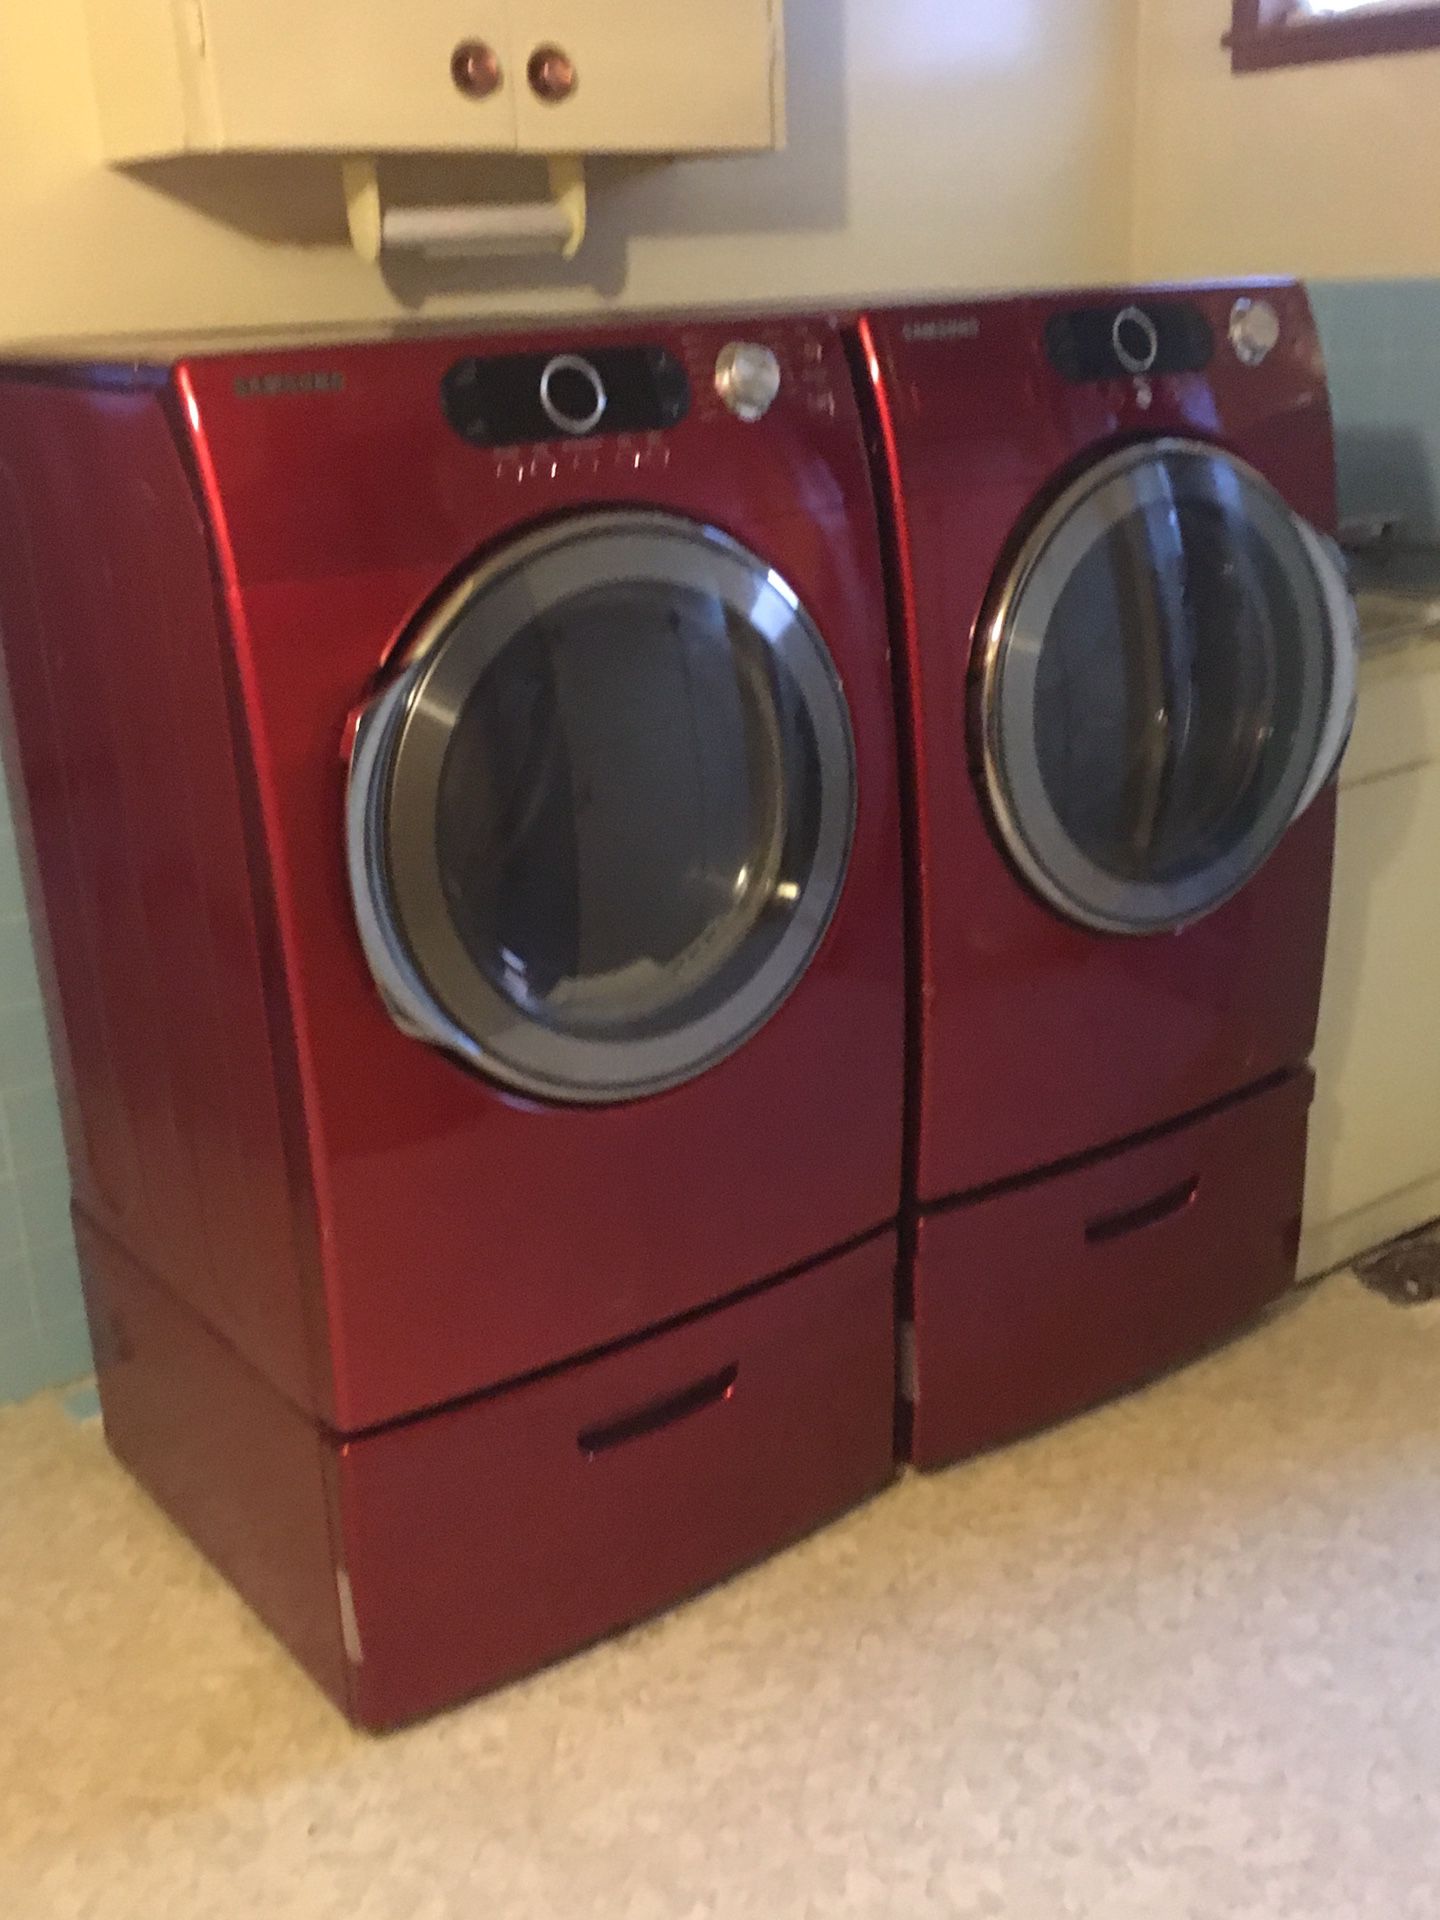 Matching set washer and dryer with pedestals.